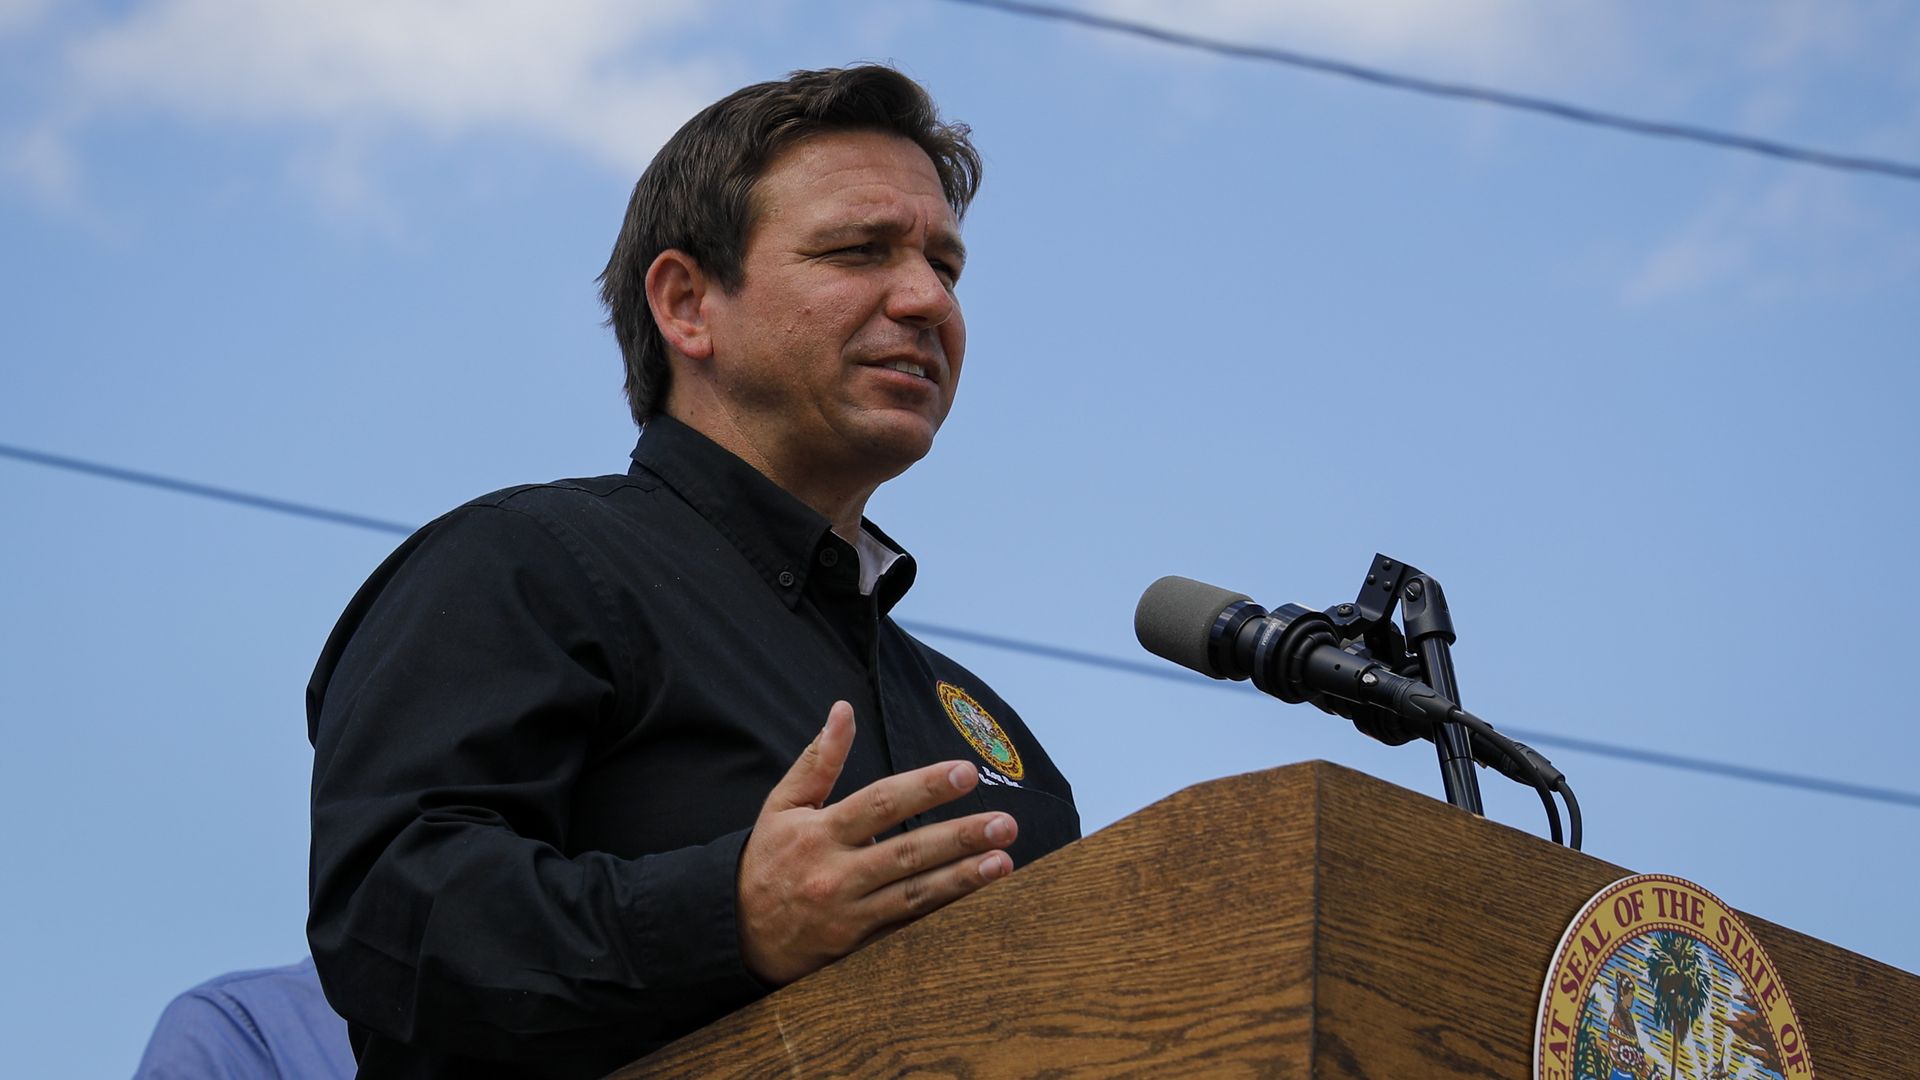 Photo of Ron DeSantis speaking from a podium at an outdoor event